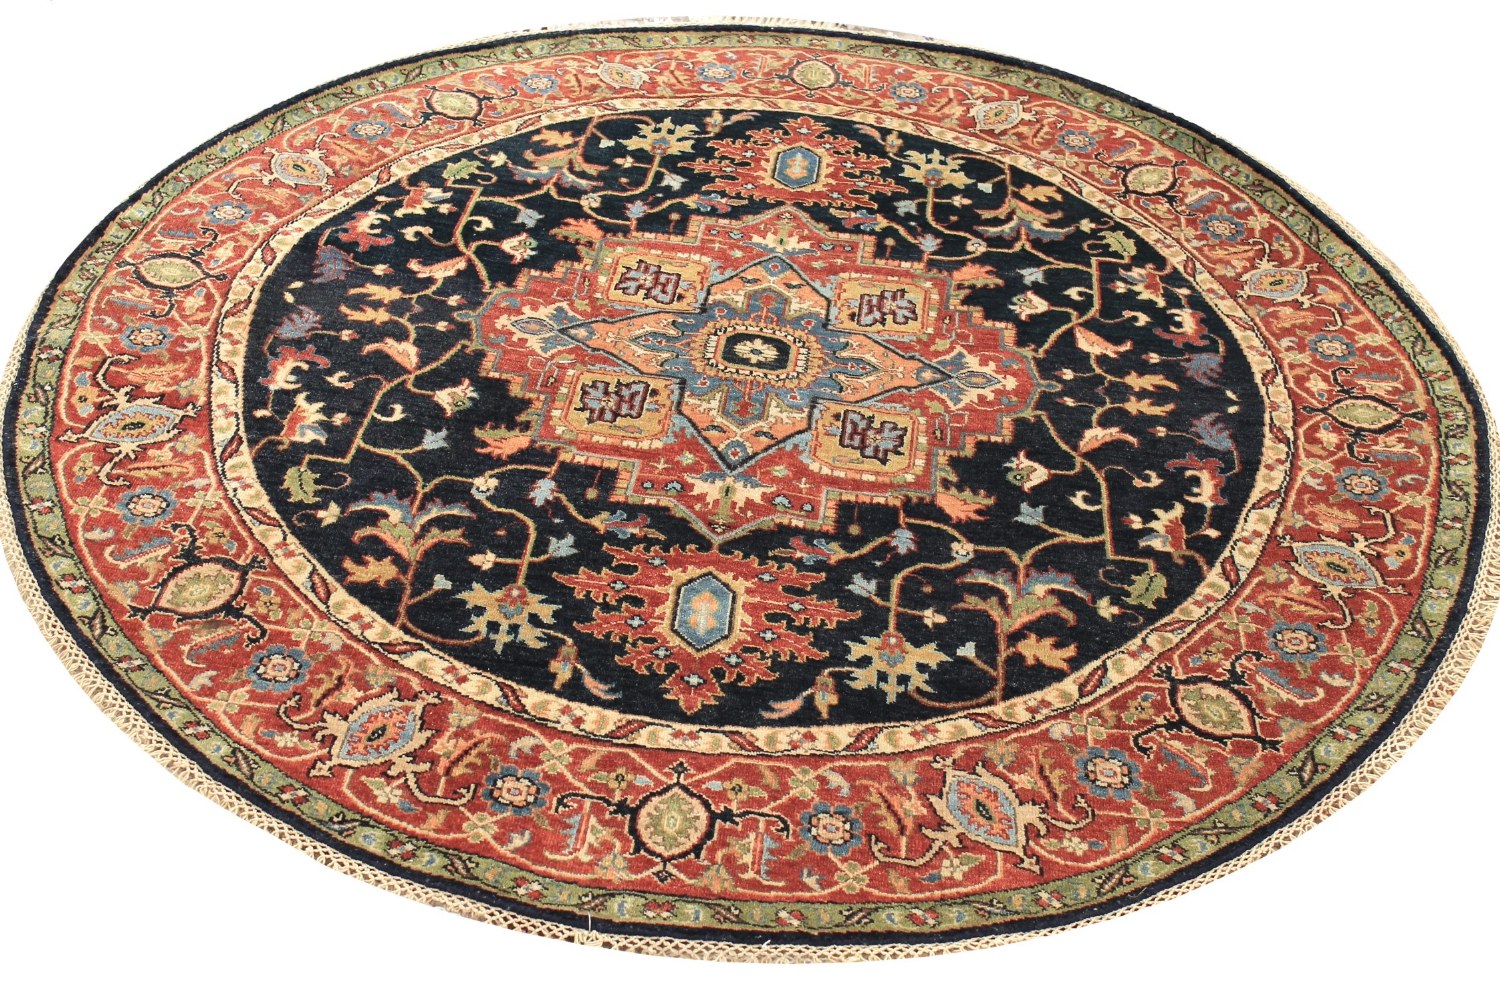 6 ft. - 7 ft. Round & Square Heriz/Serapi Hand Knotted Wool Area Rug - MR028156